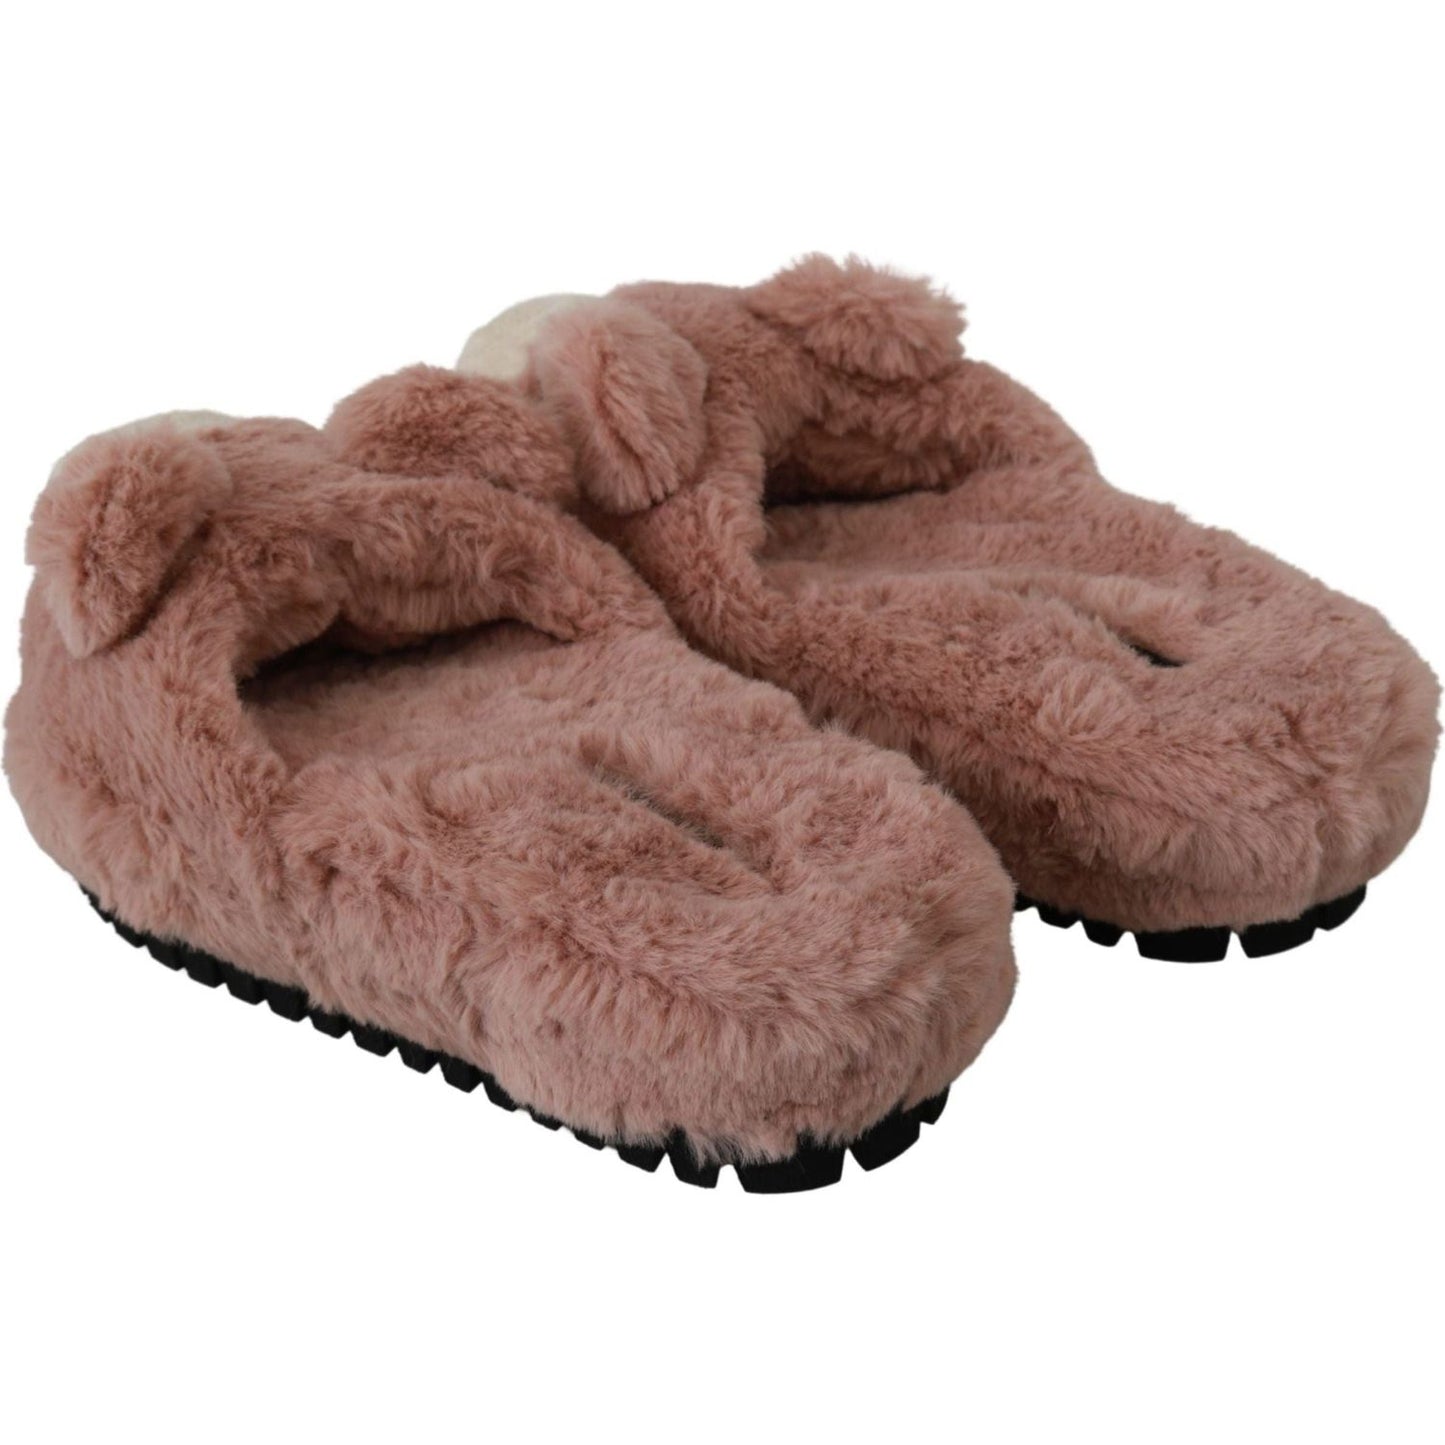 Dolce & Gabbana Chic Pink Bear House Slippers by D&G pink-bear-house-slippers-sandals-shoes